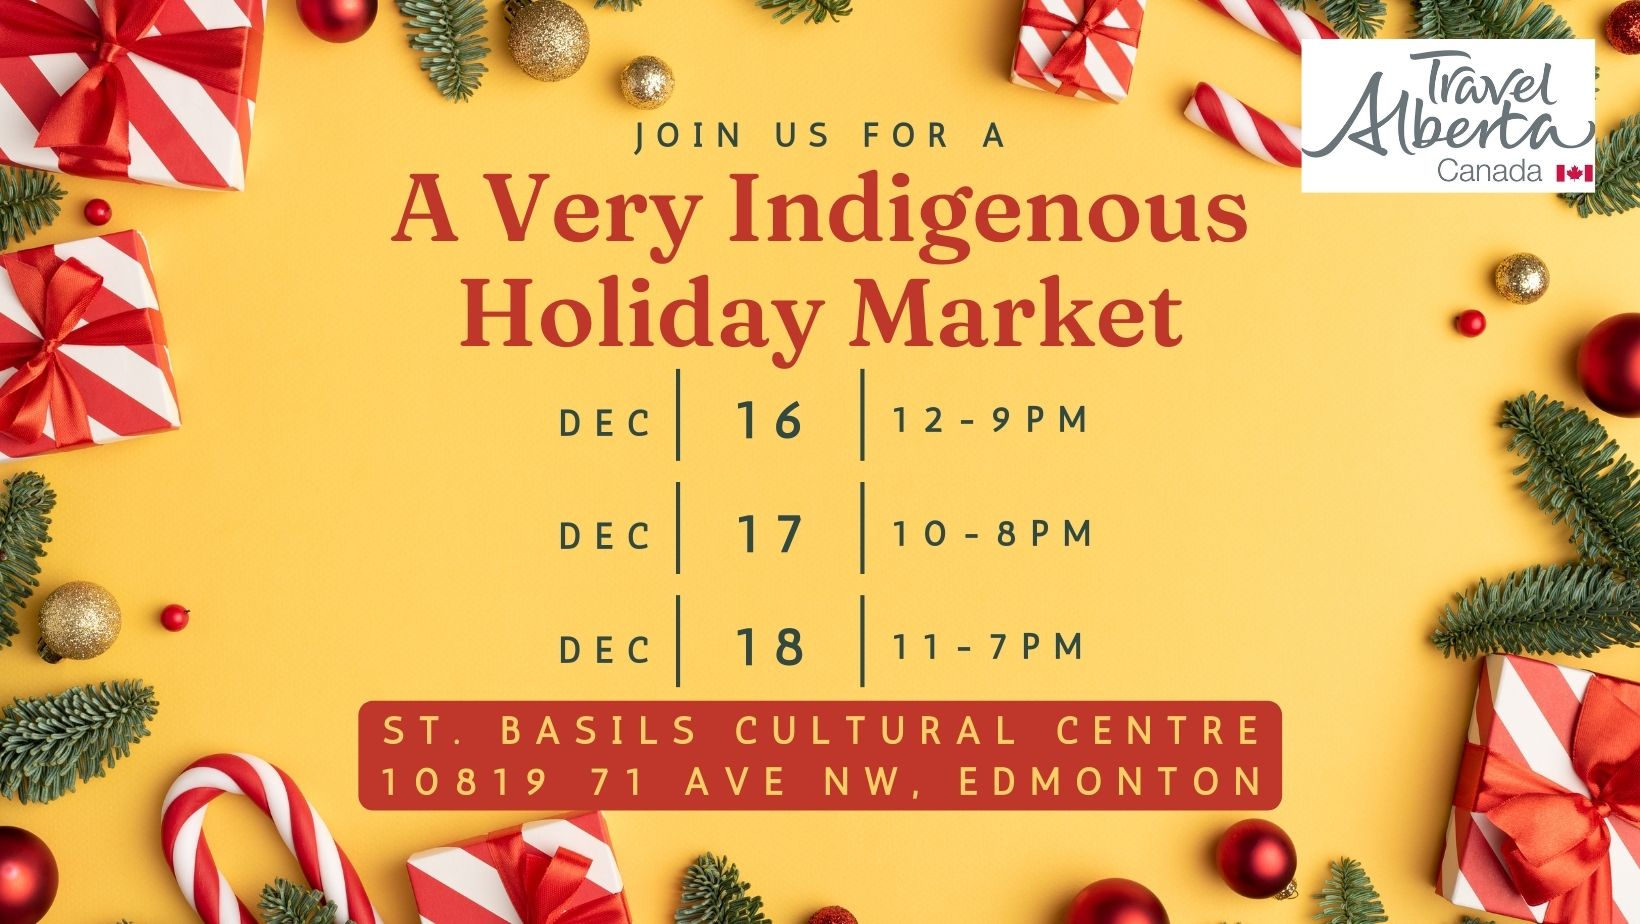 Featured image for “A Very Indigenous Holiday Market at St. Basils Cultural Centre”